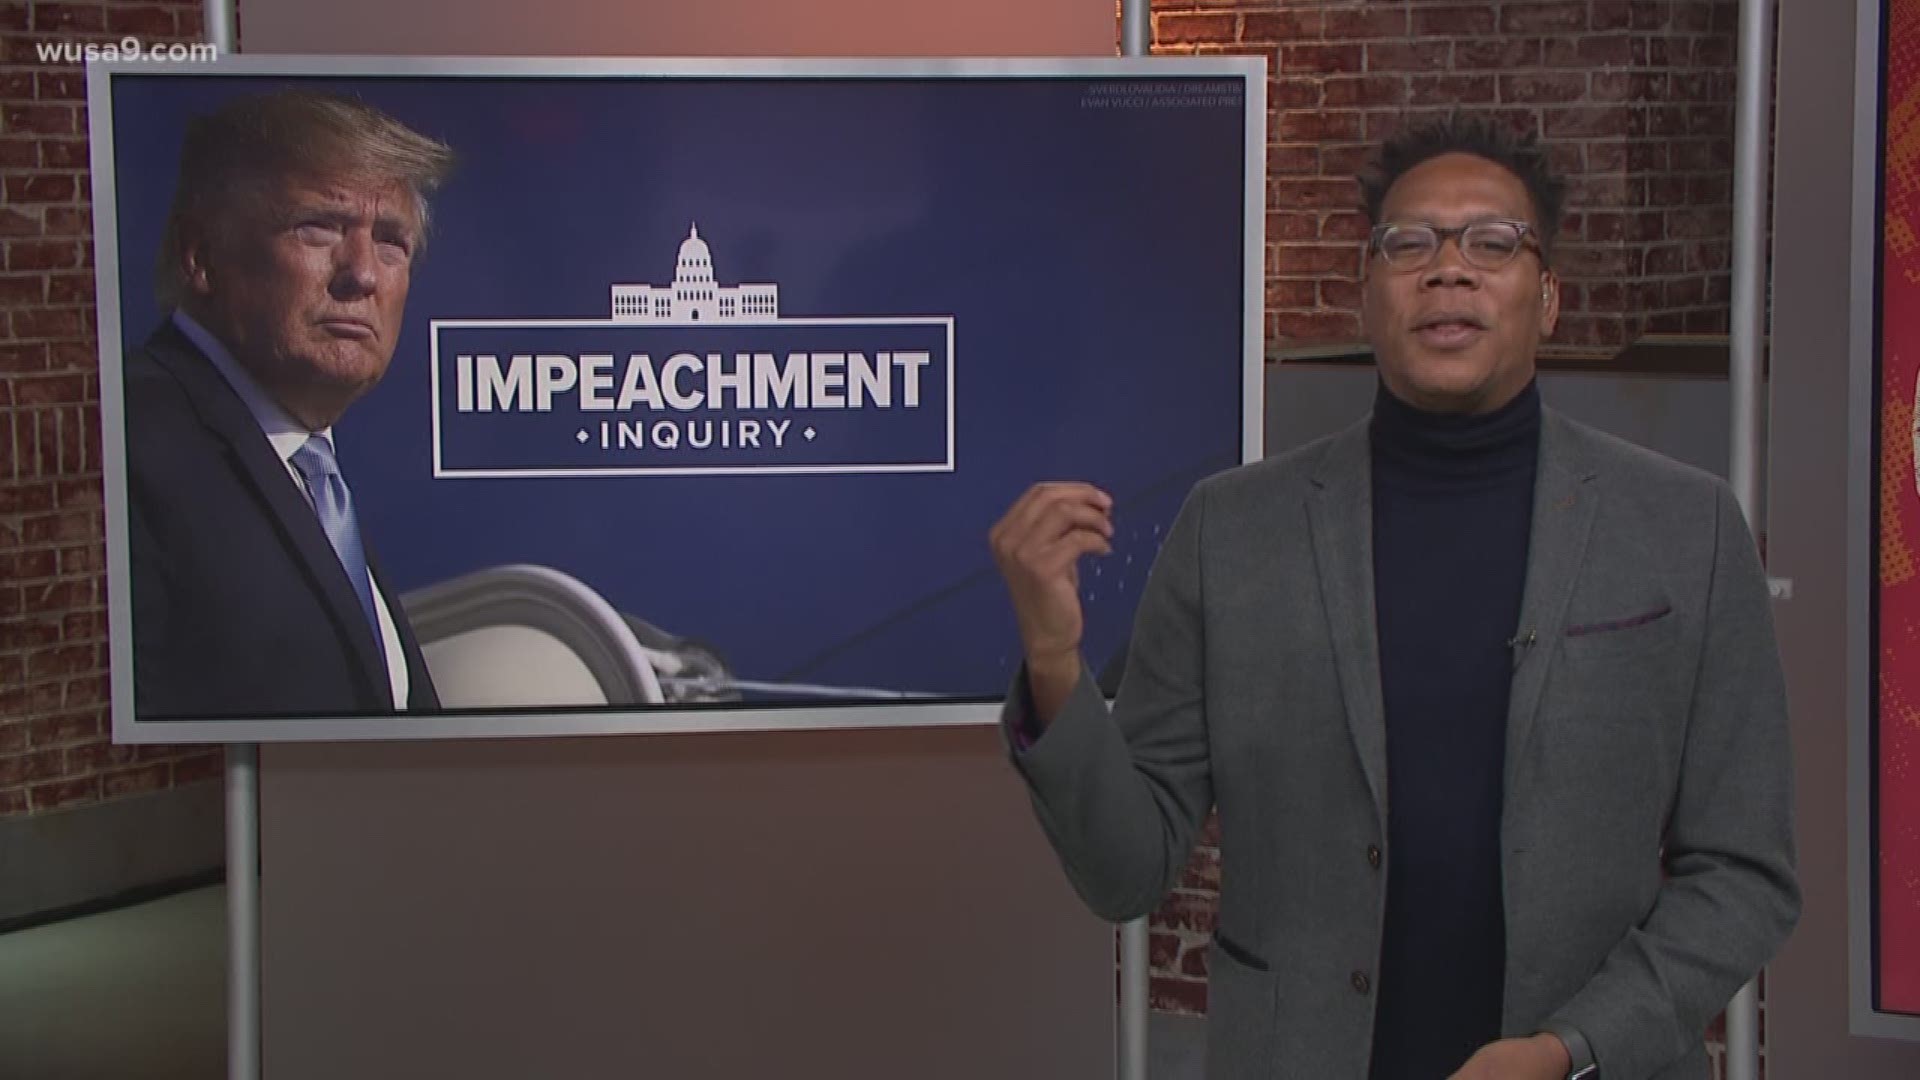 A decision will be made on whether members of the committee will send articles of impeachment for Congress to vote on.